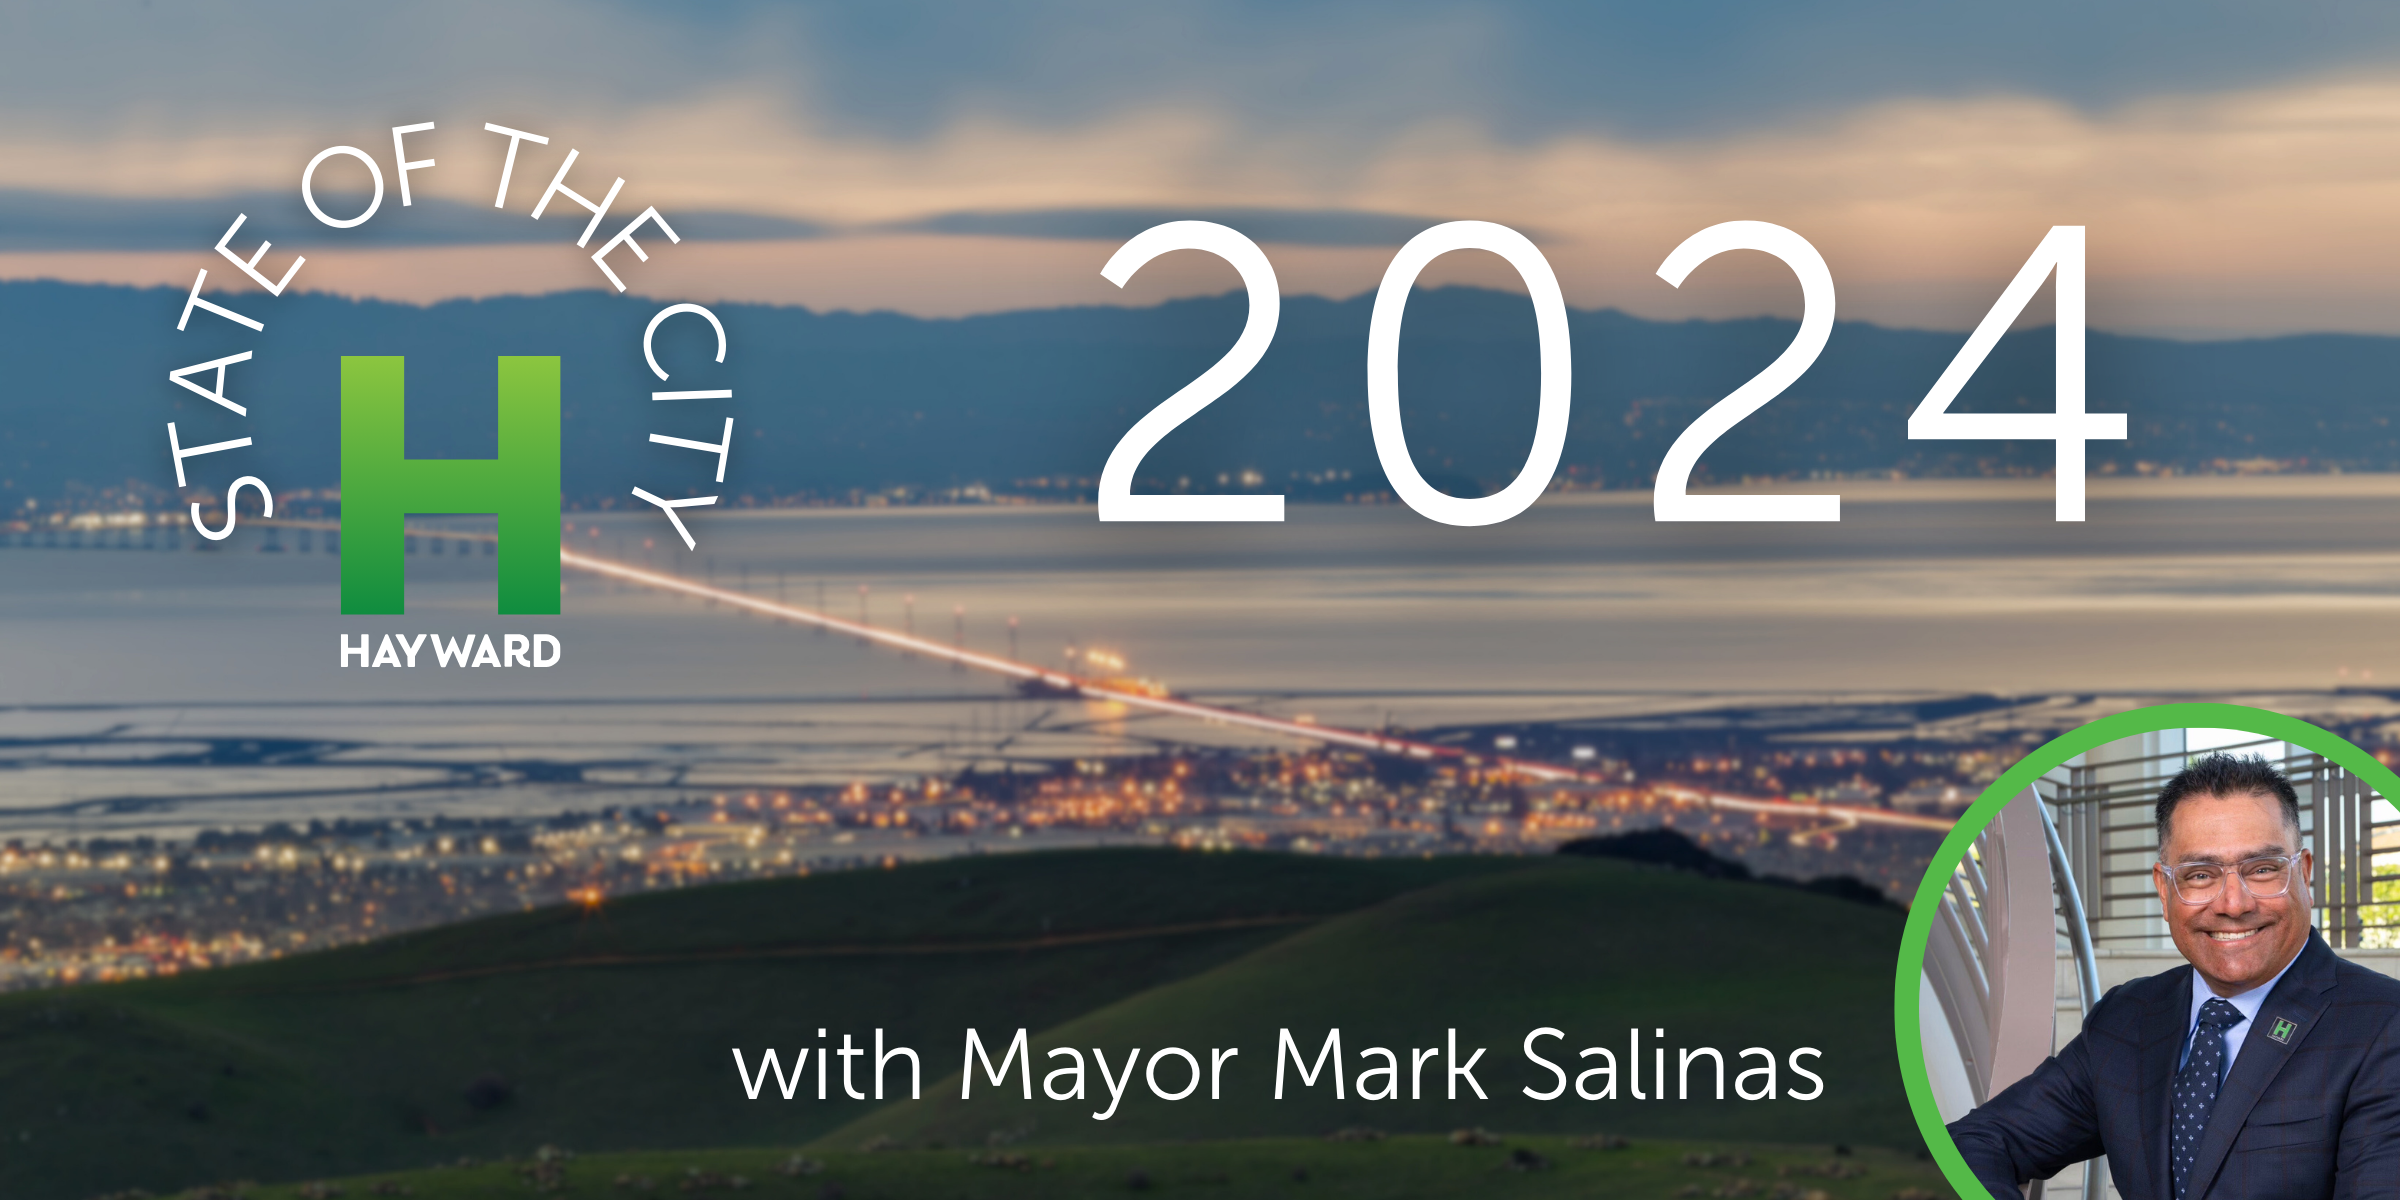 Hayward mayor to deliver first public State of the City Address Feb. 29 